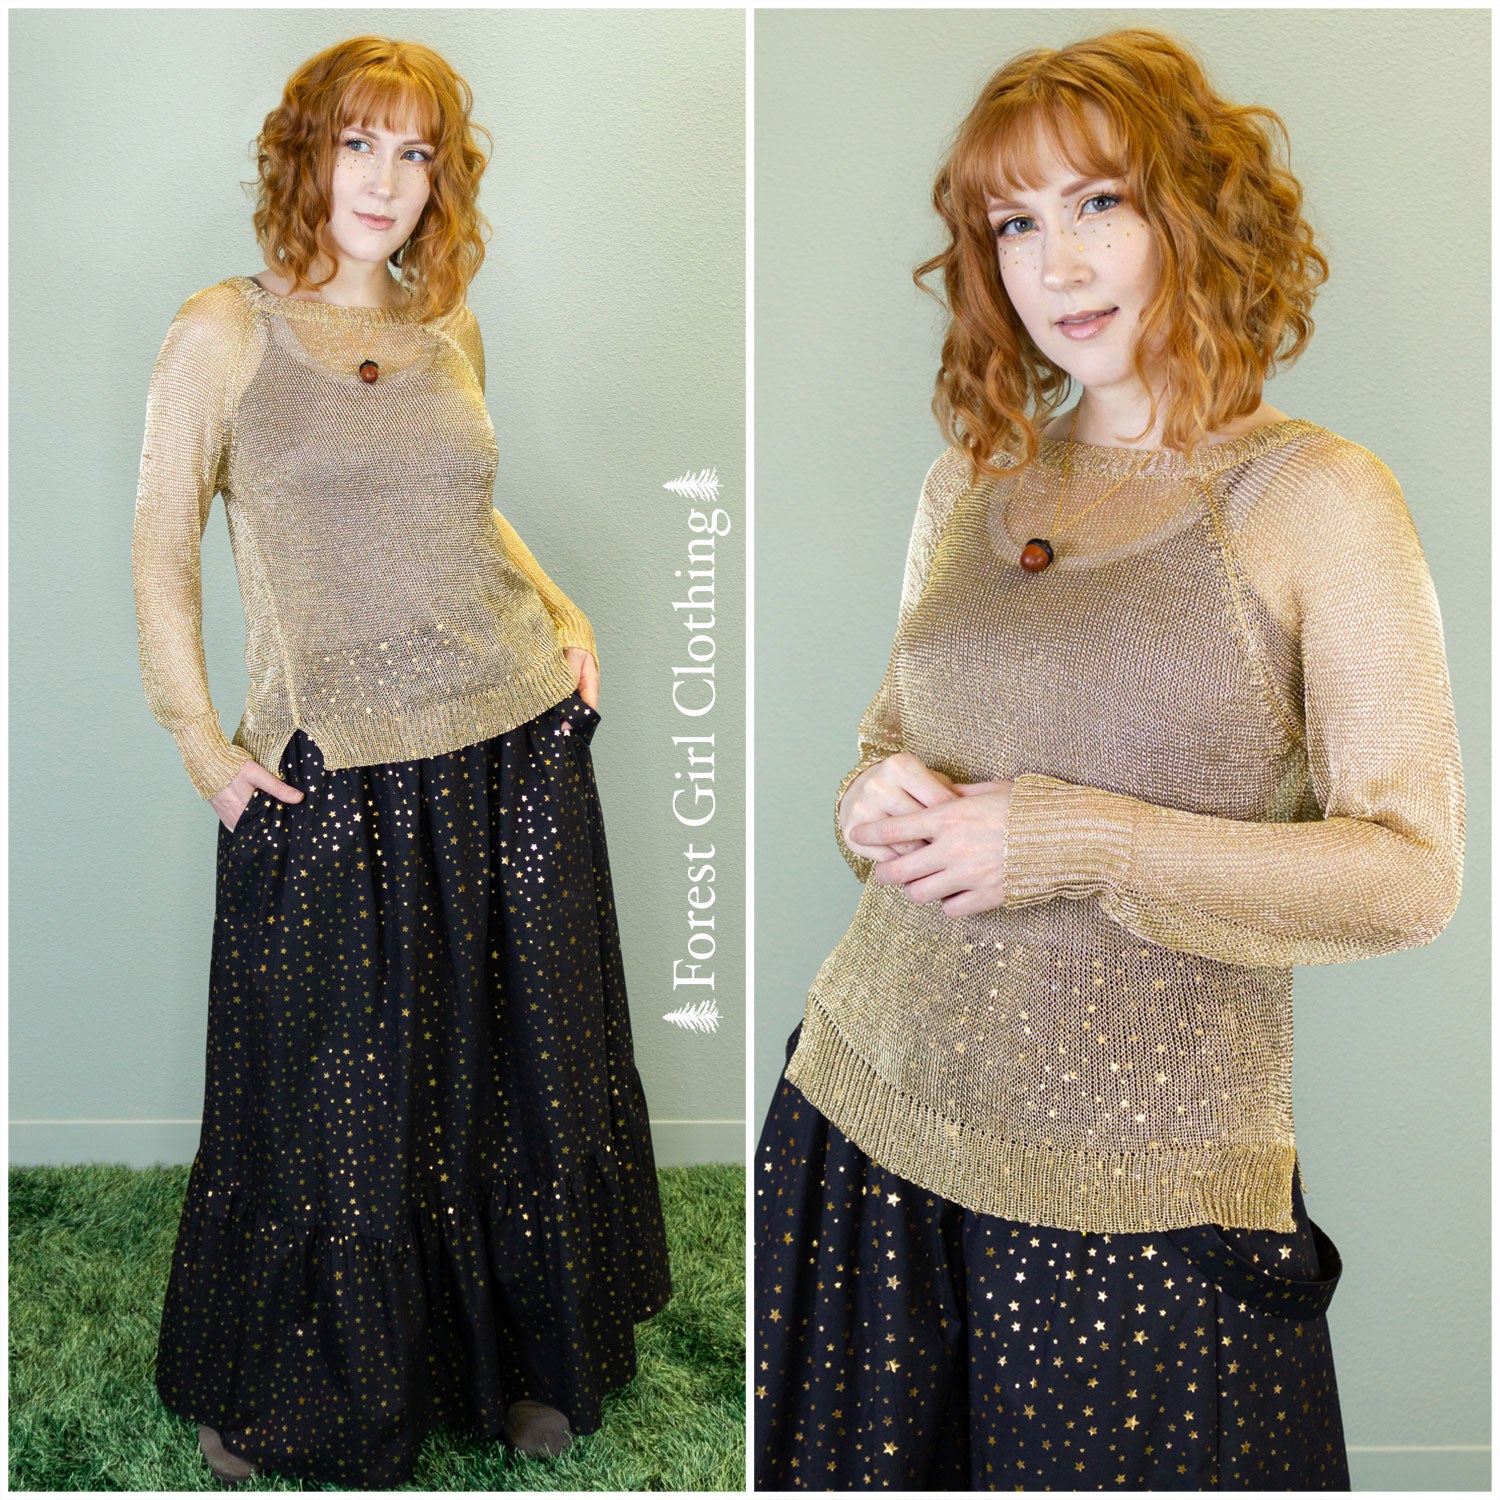 A gold mesh top and acorn necklace